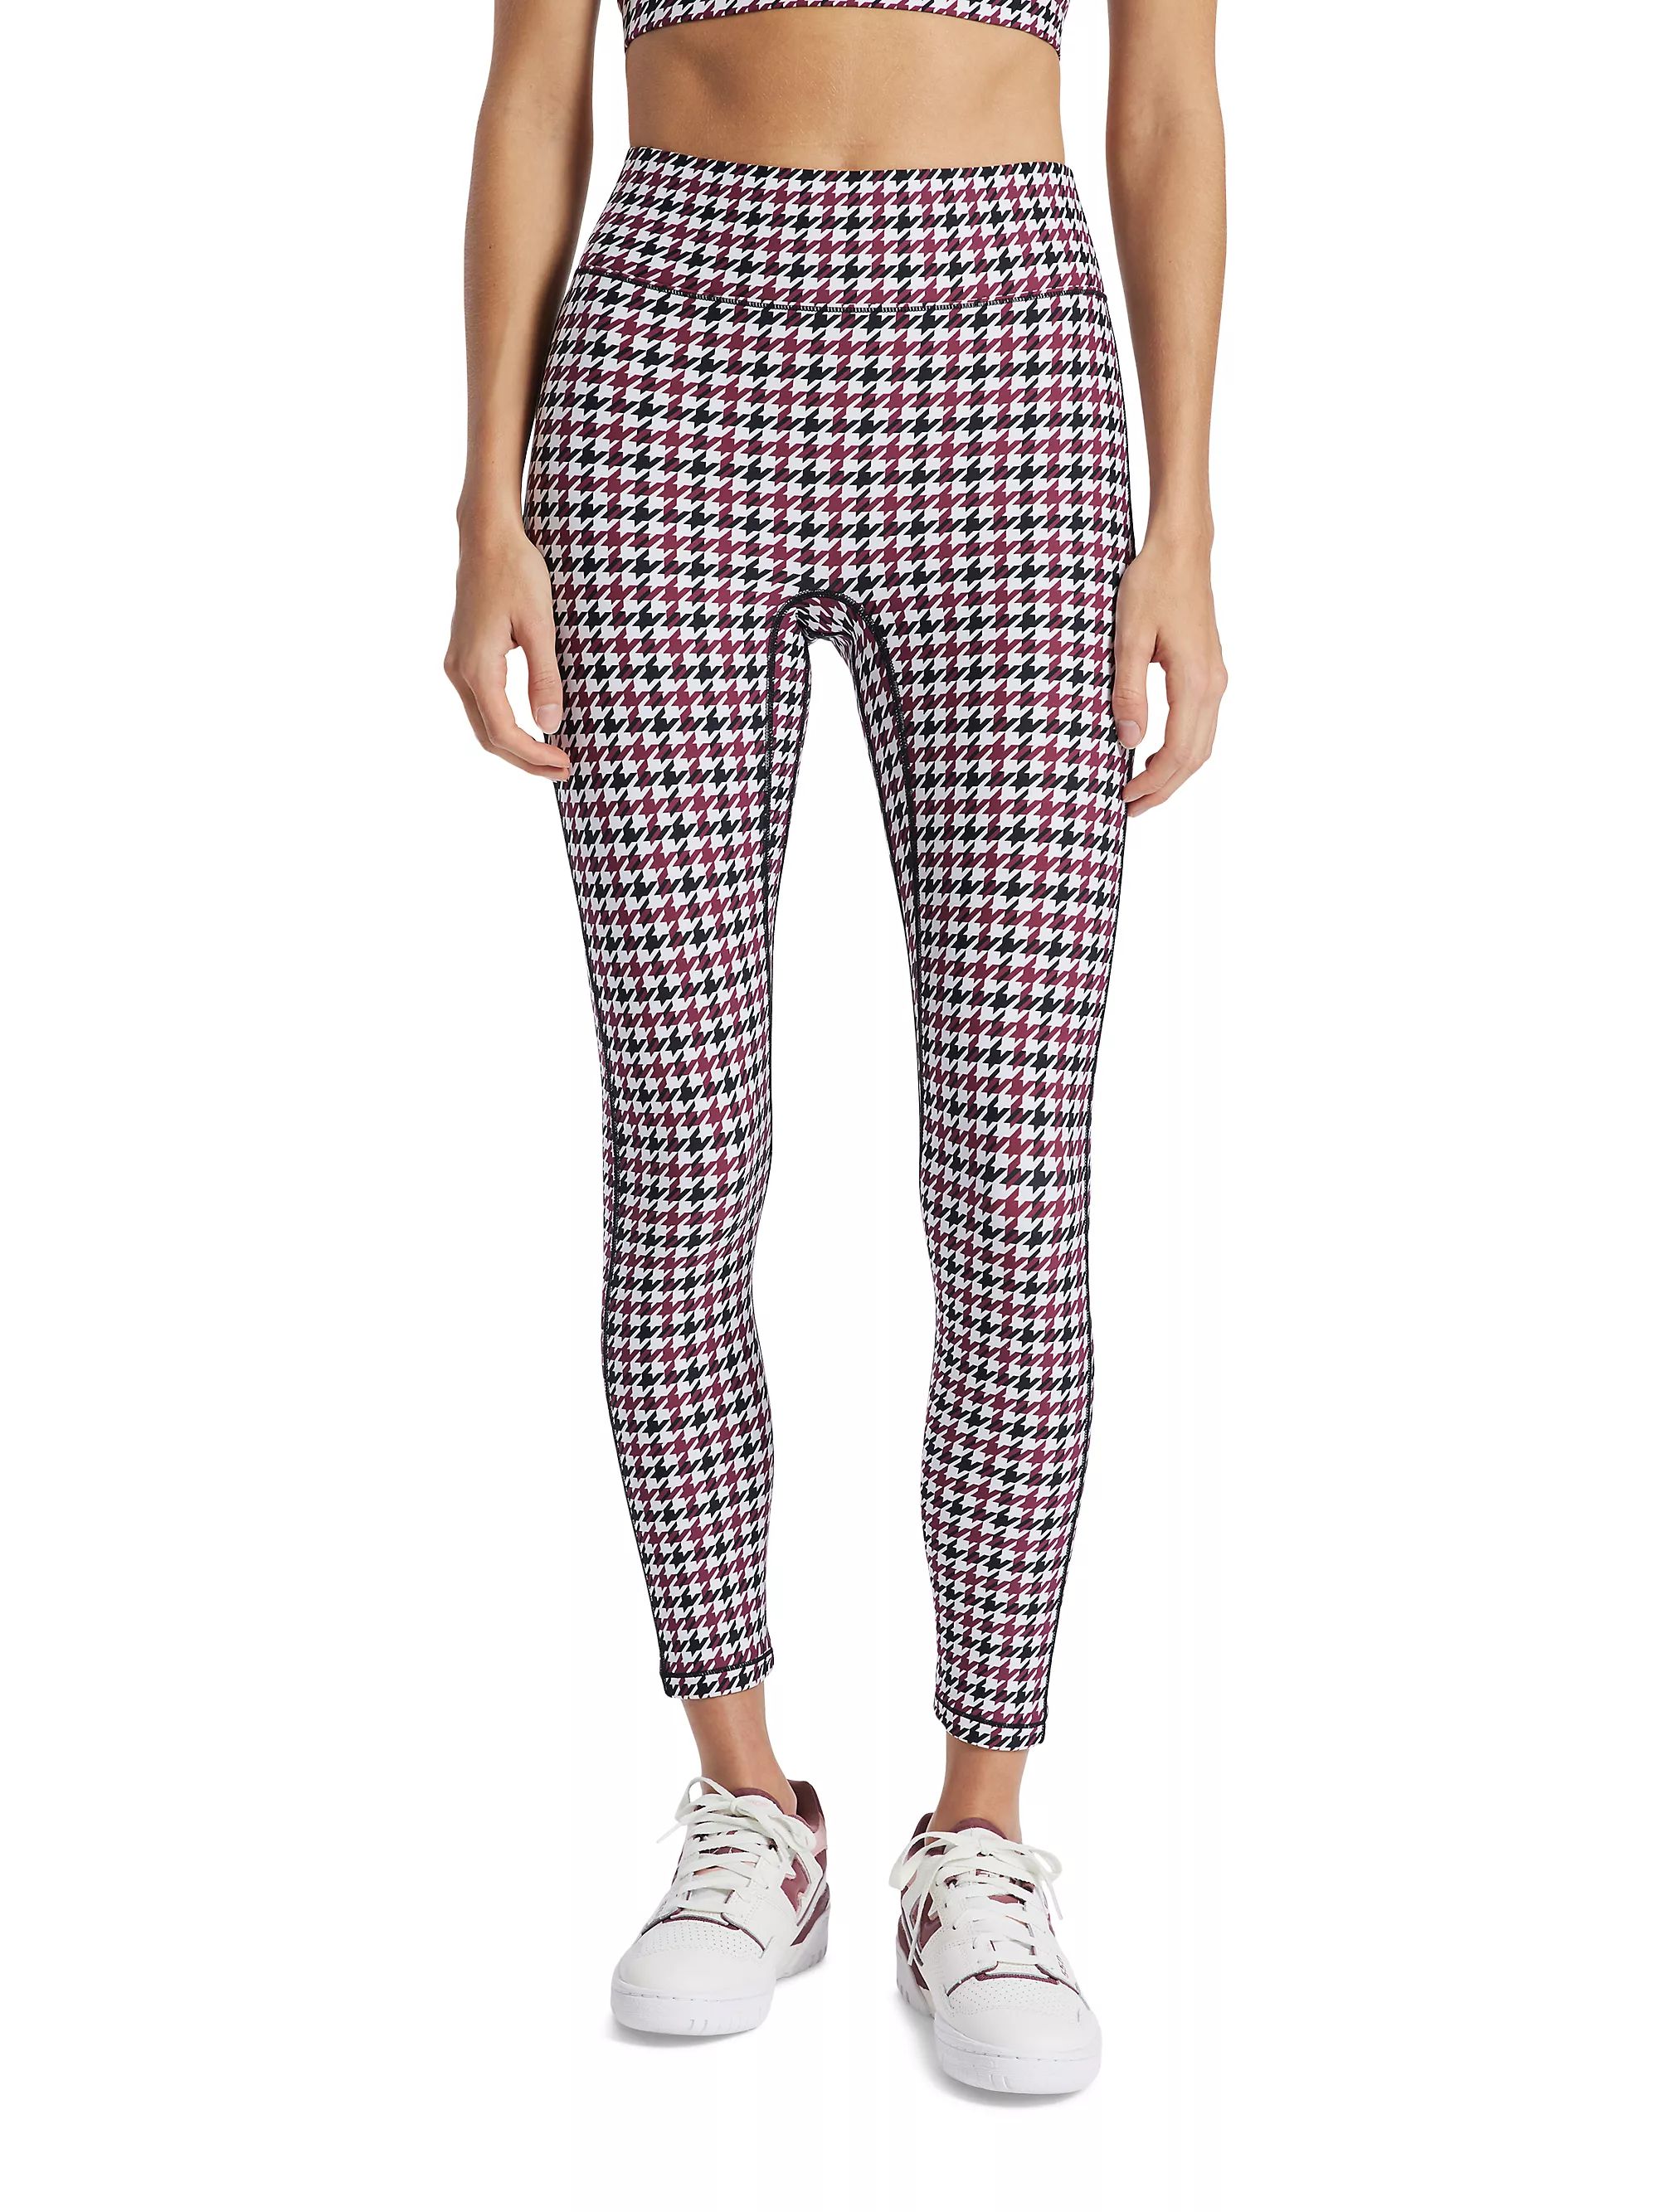 Center Stage Houndstooth Leggings | Saks Fifth Avenue